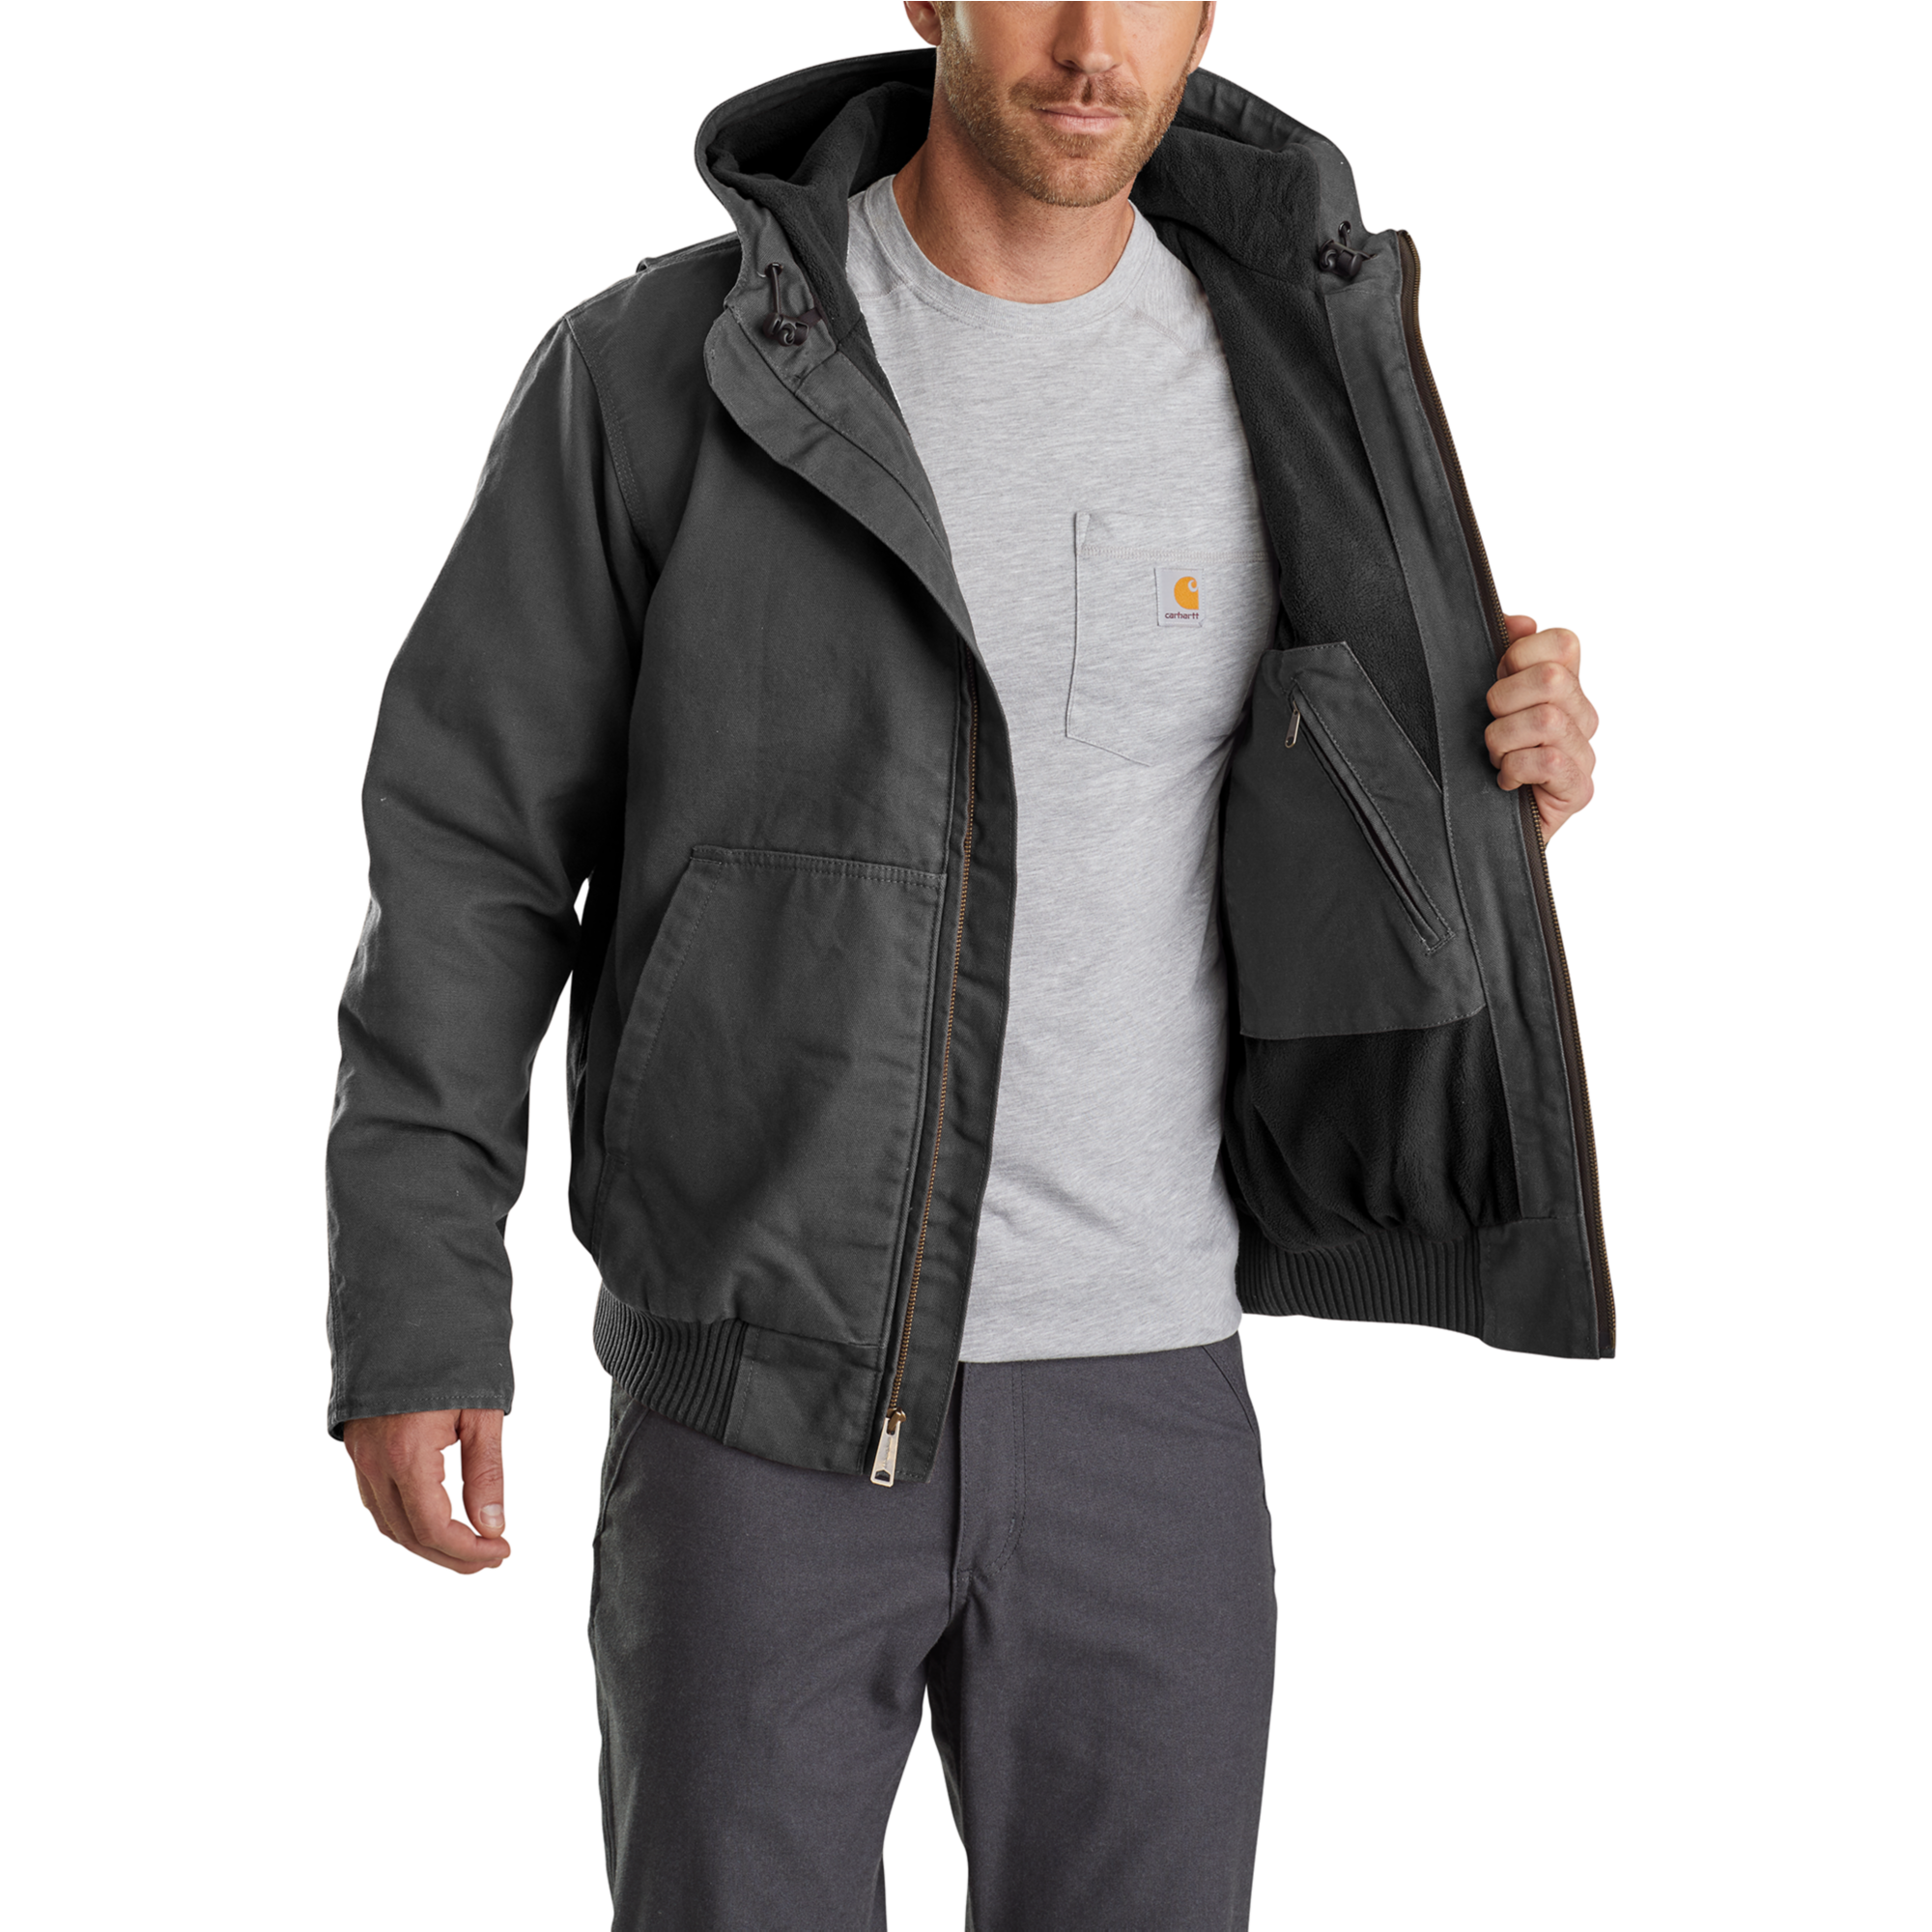 Carhartt Men's Full Swing Armstrong Active Jacket - Traditions